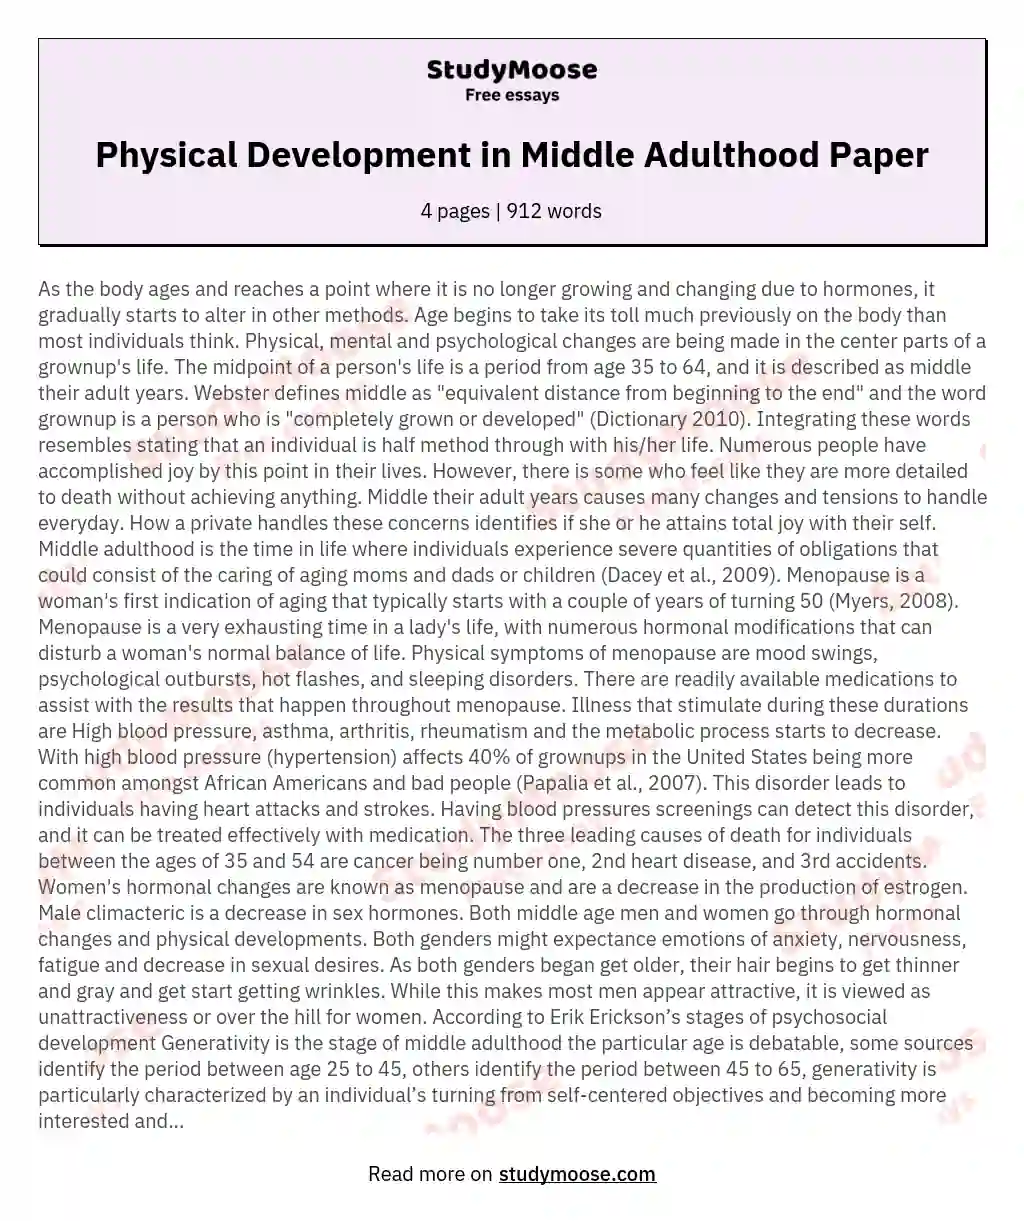 Physical Development in Middle Adulthood Paper essay